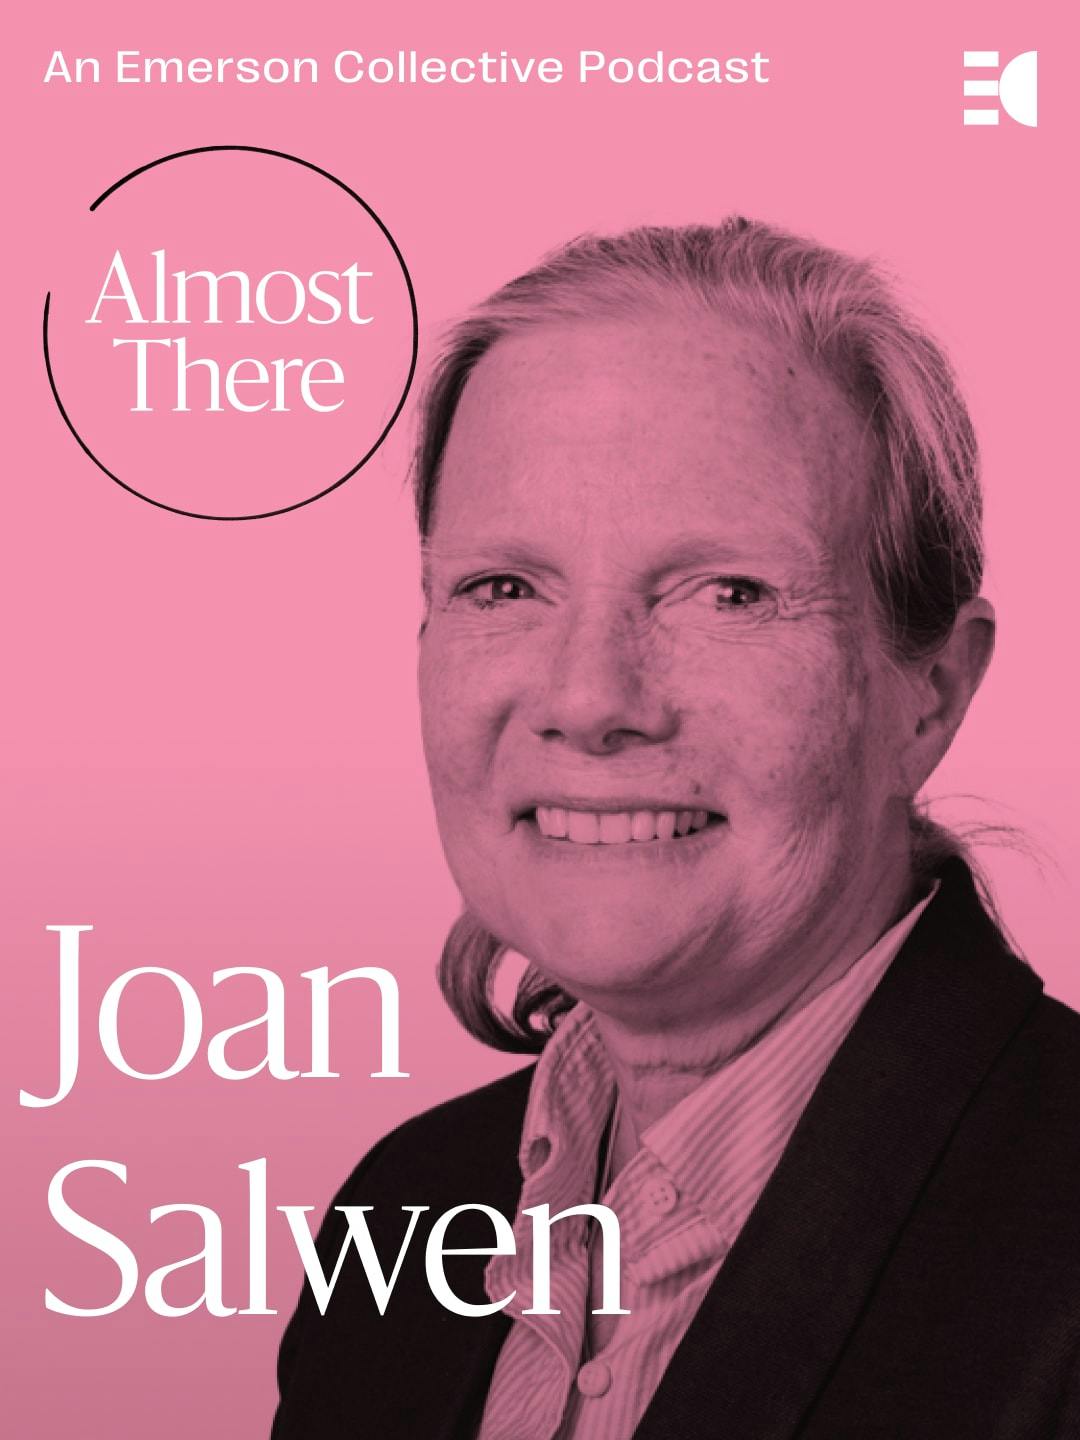 Image of Joan Salwen with Almost There branding